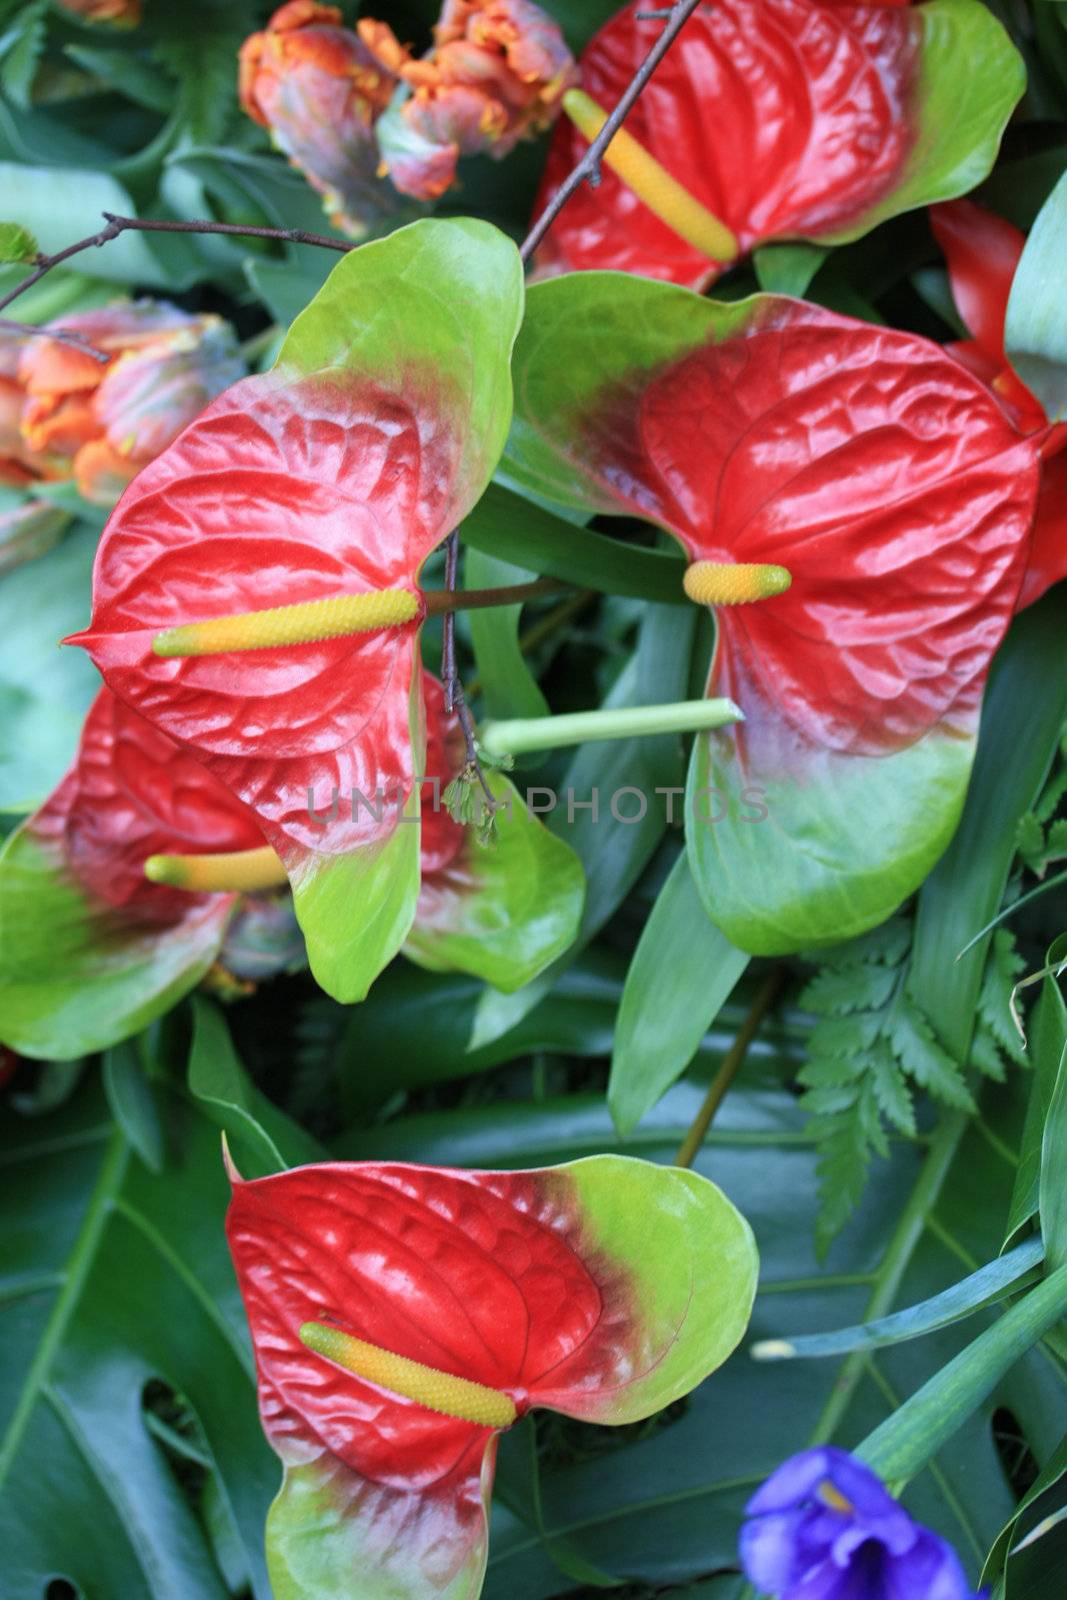 Flower arrangement, made from red anthuriums and green leaves